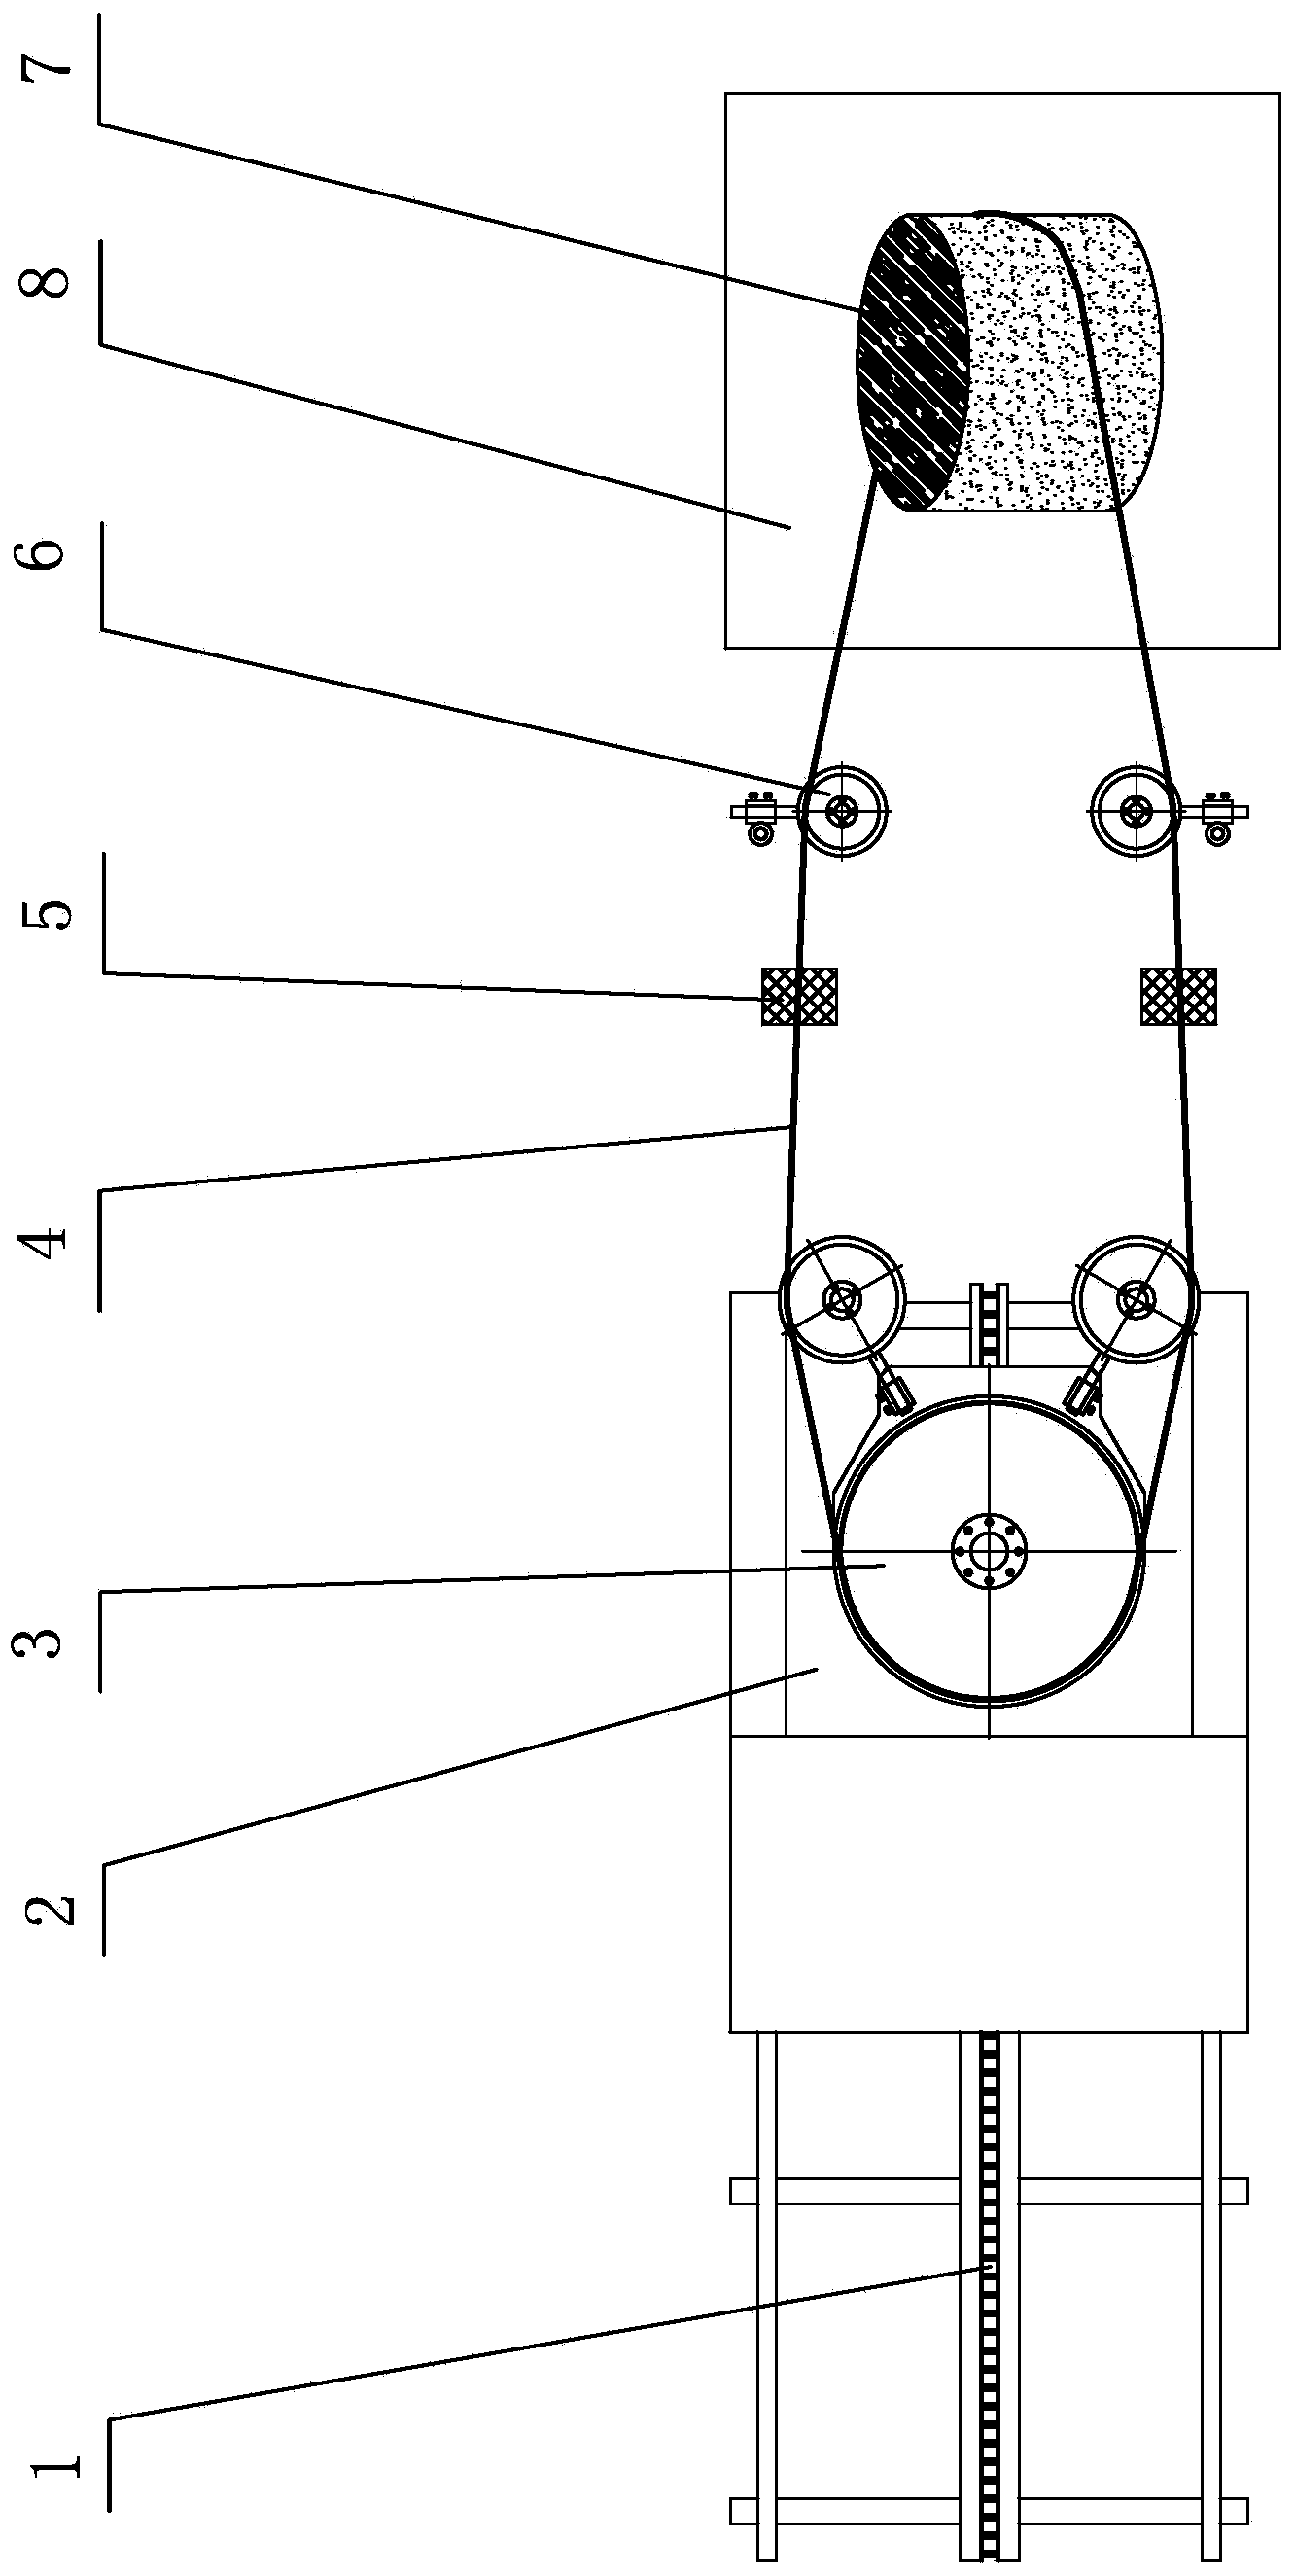 Large alloy steel part cutting method through diamond wire saw